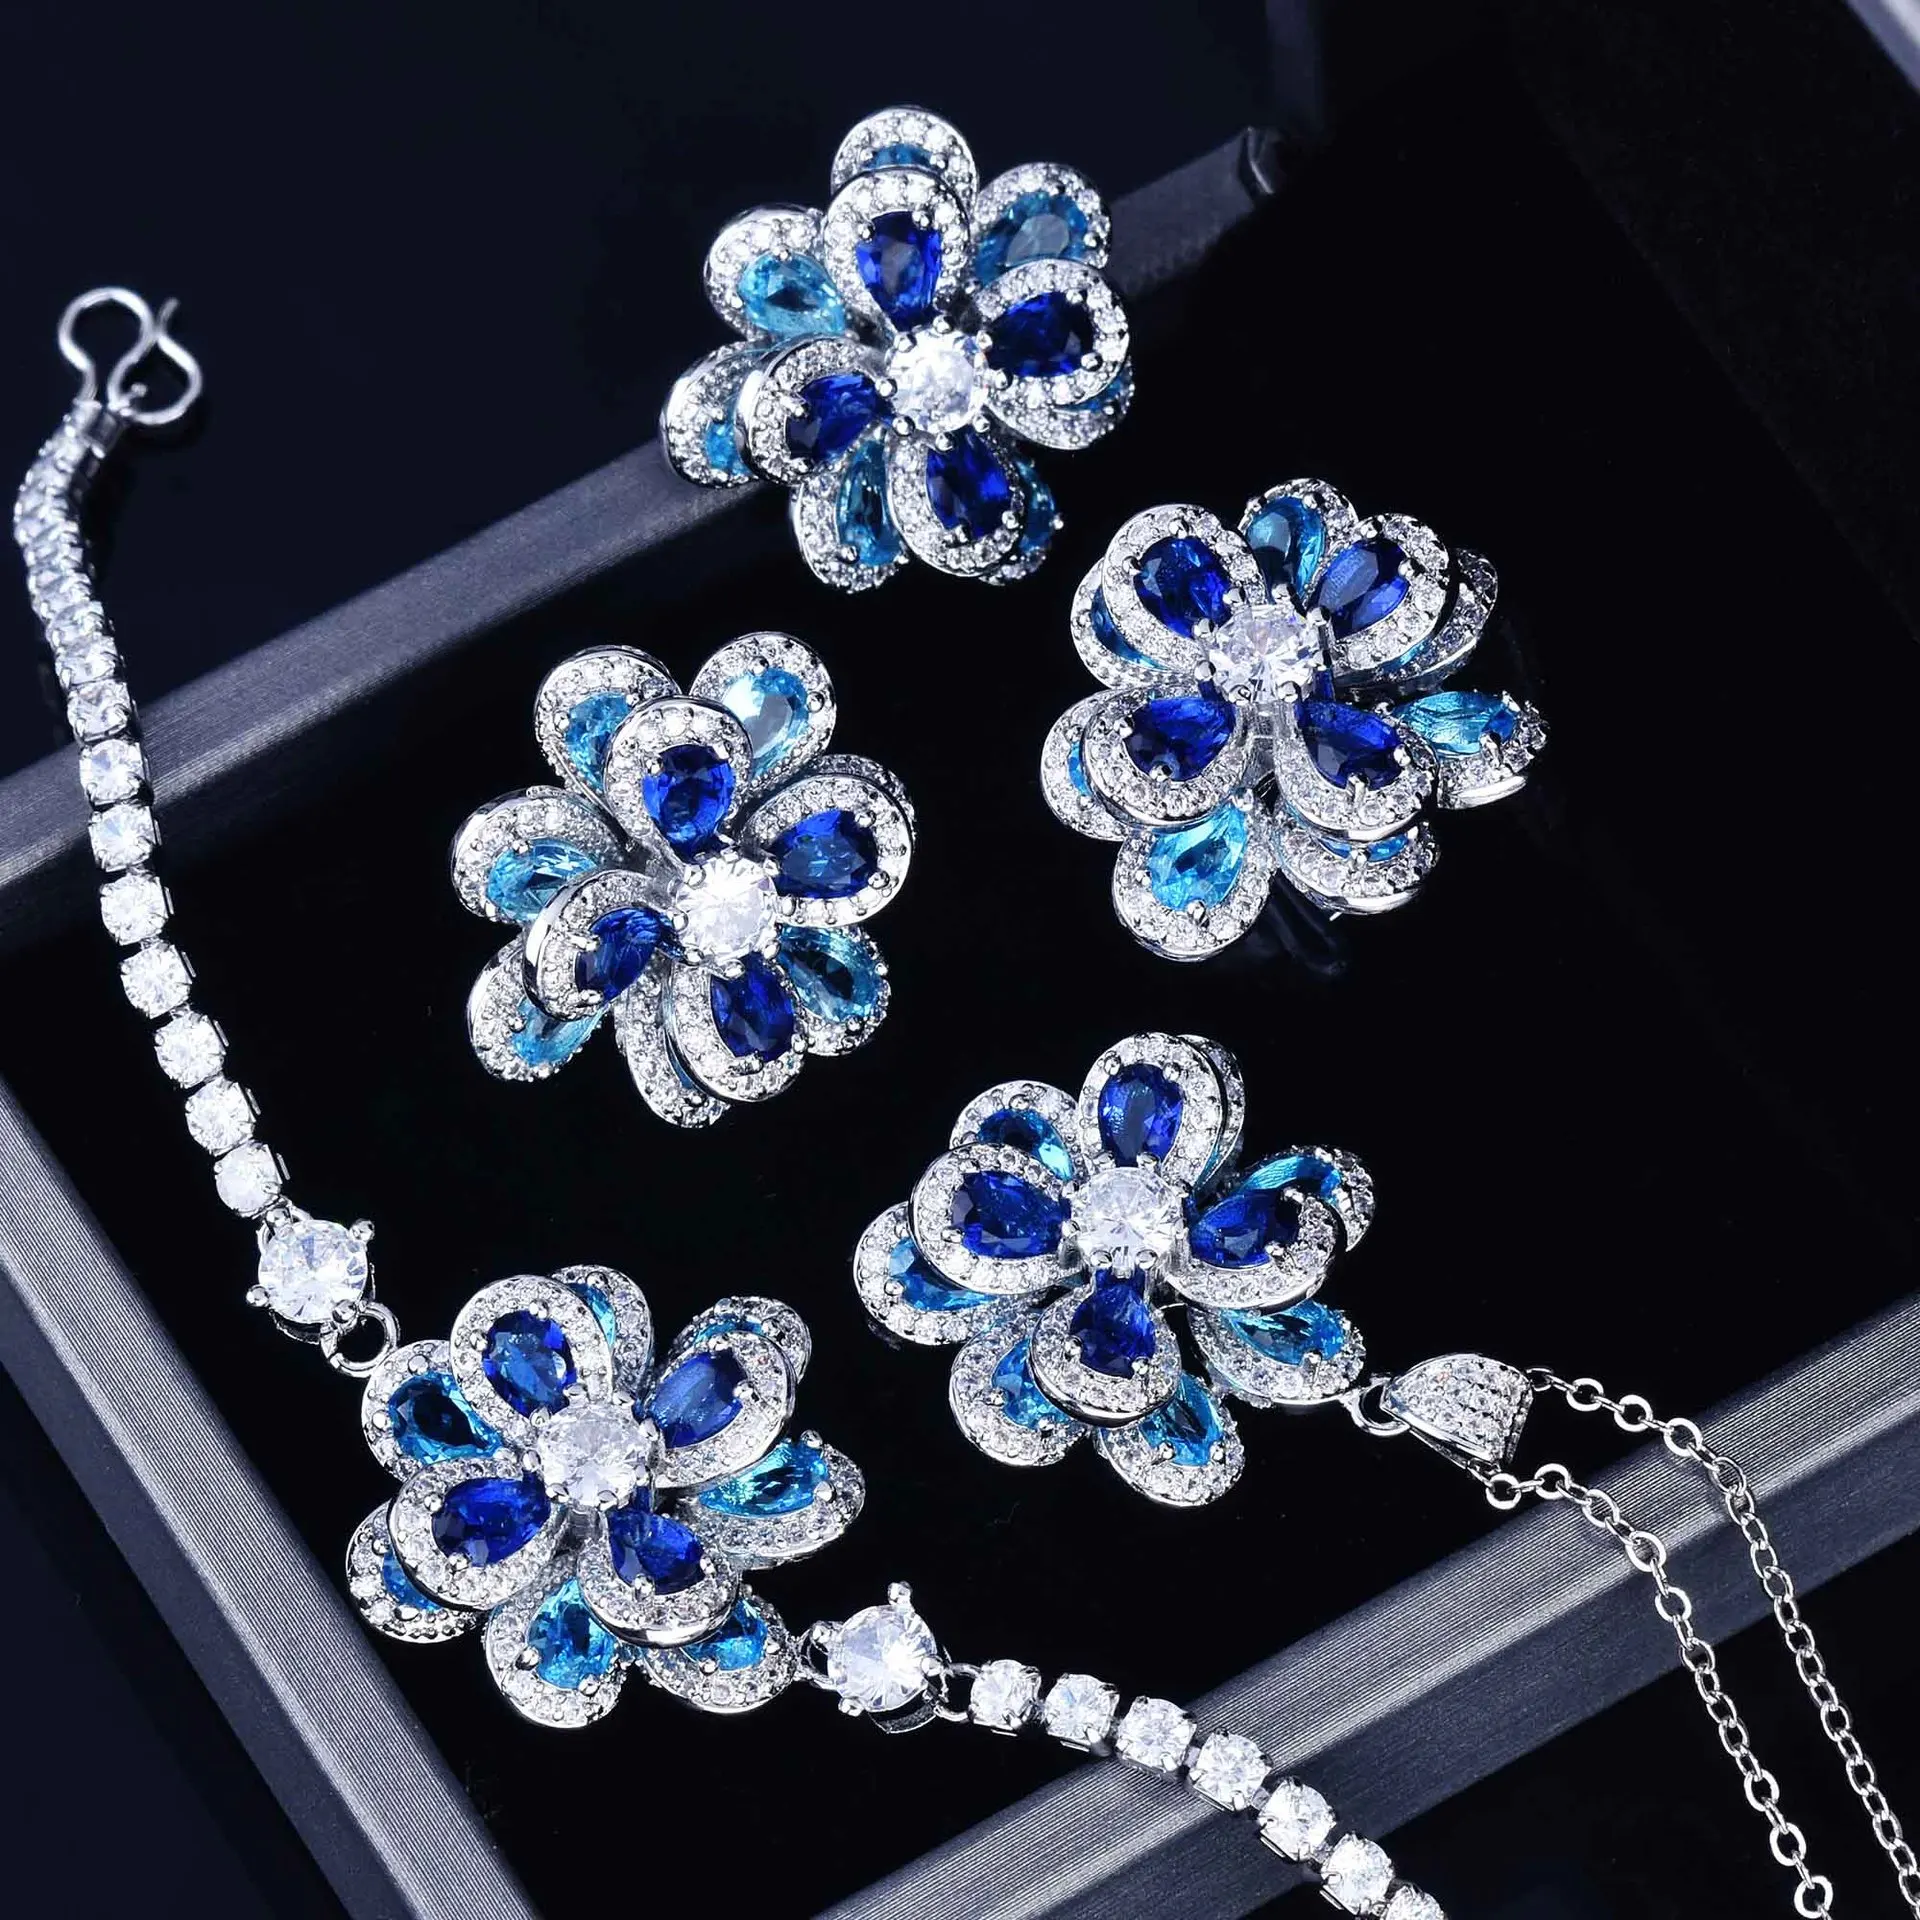  Top Quality Royal Blue Lab Sapphire Stone Jewelry  Silver Color Flower Shape Wedding Eengagement Bridal Jewelry Gift